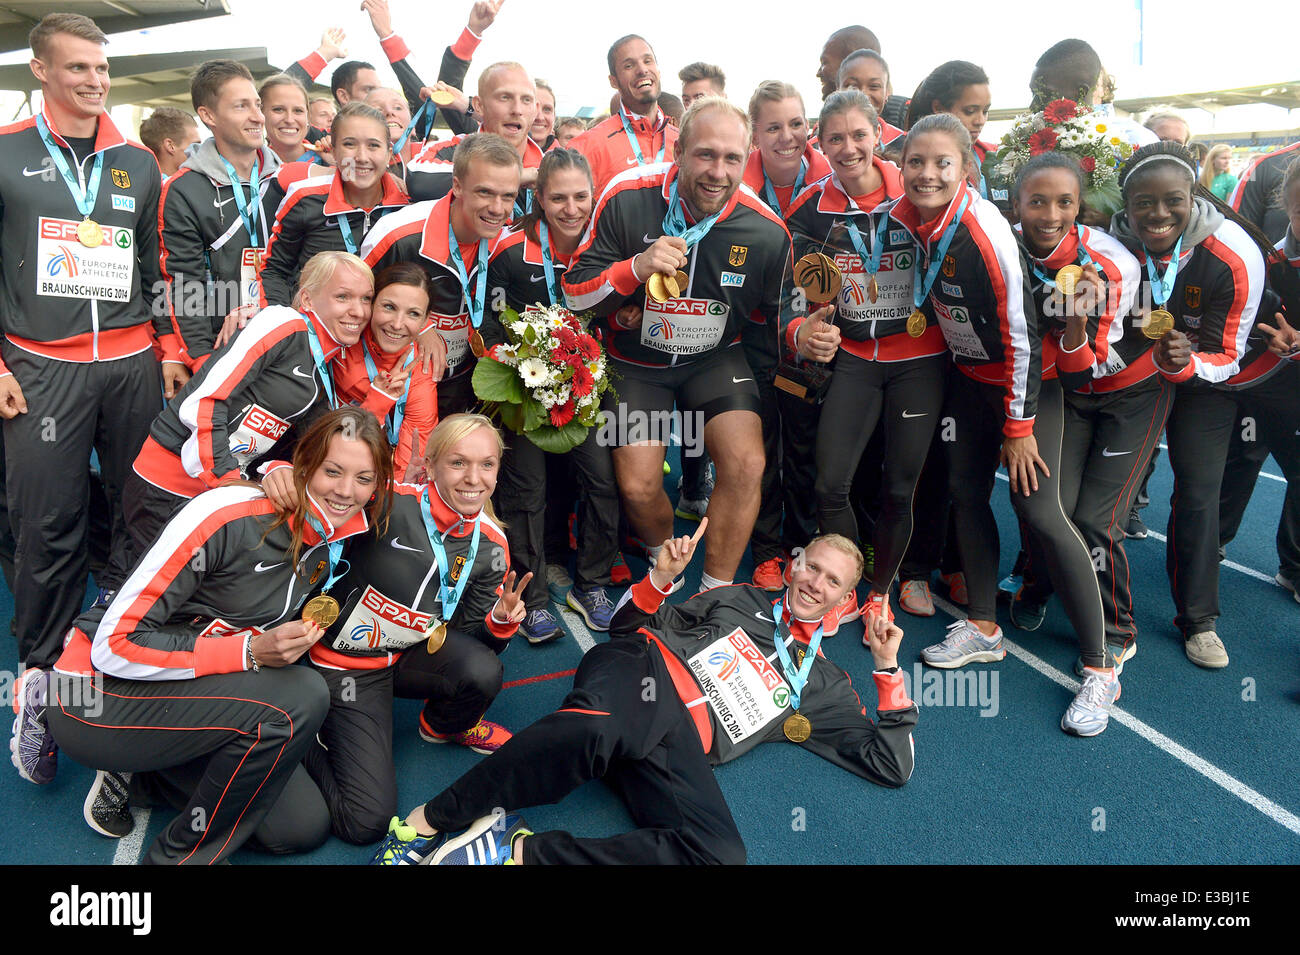 Braunschweig, Germany. 22nd June, 2014. The German team celebrates the victory in the European Athletics Team Championships in the Eintracht Stadion in Braunschweig, Germany, 22 June 2014. Photo: Peter Steffen/dpa/Alamy Live News Stock Photo